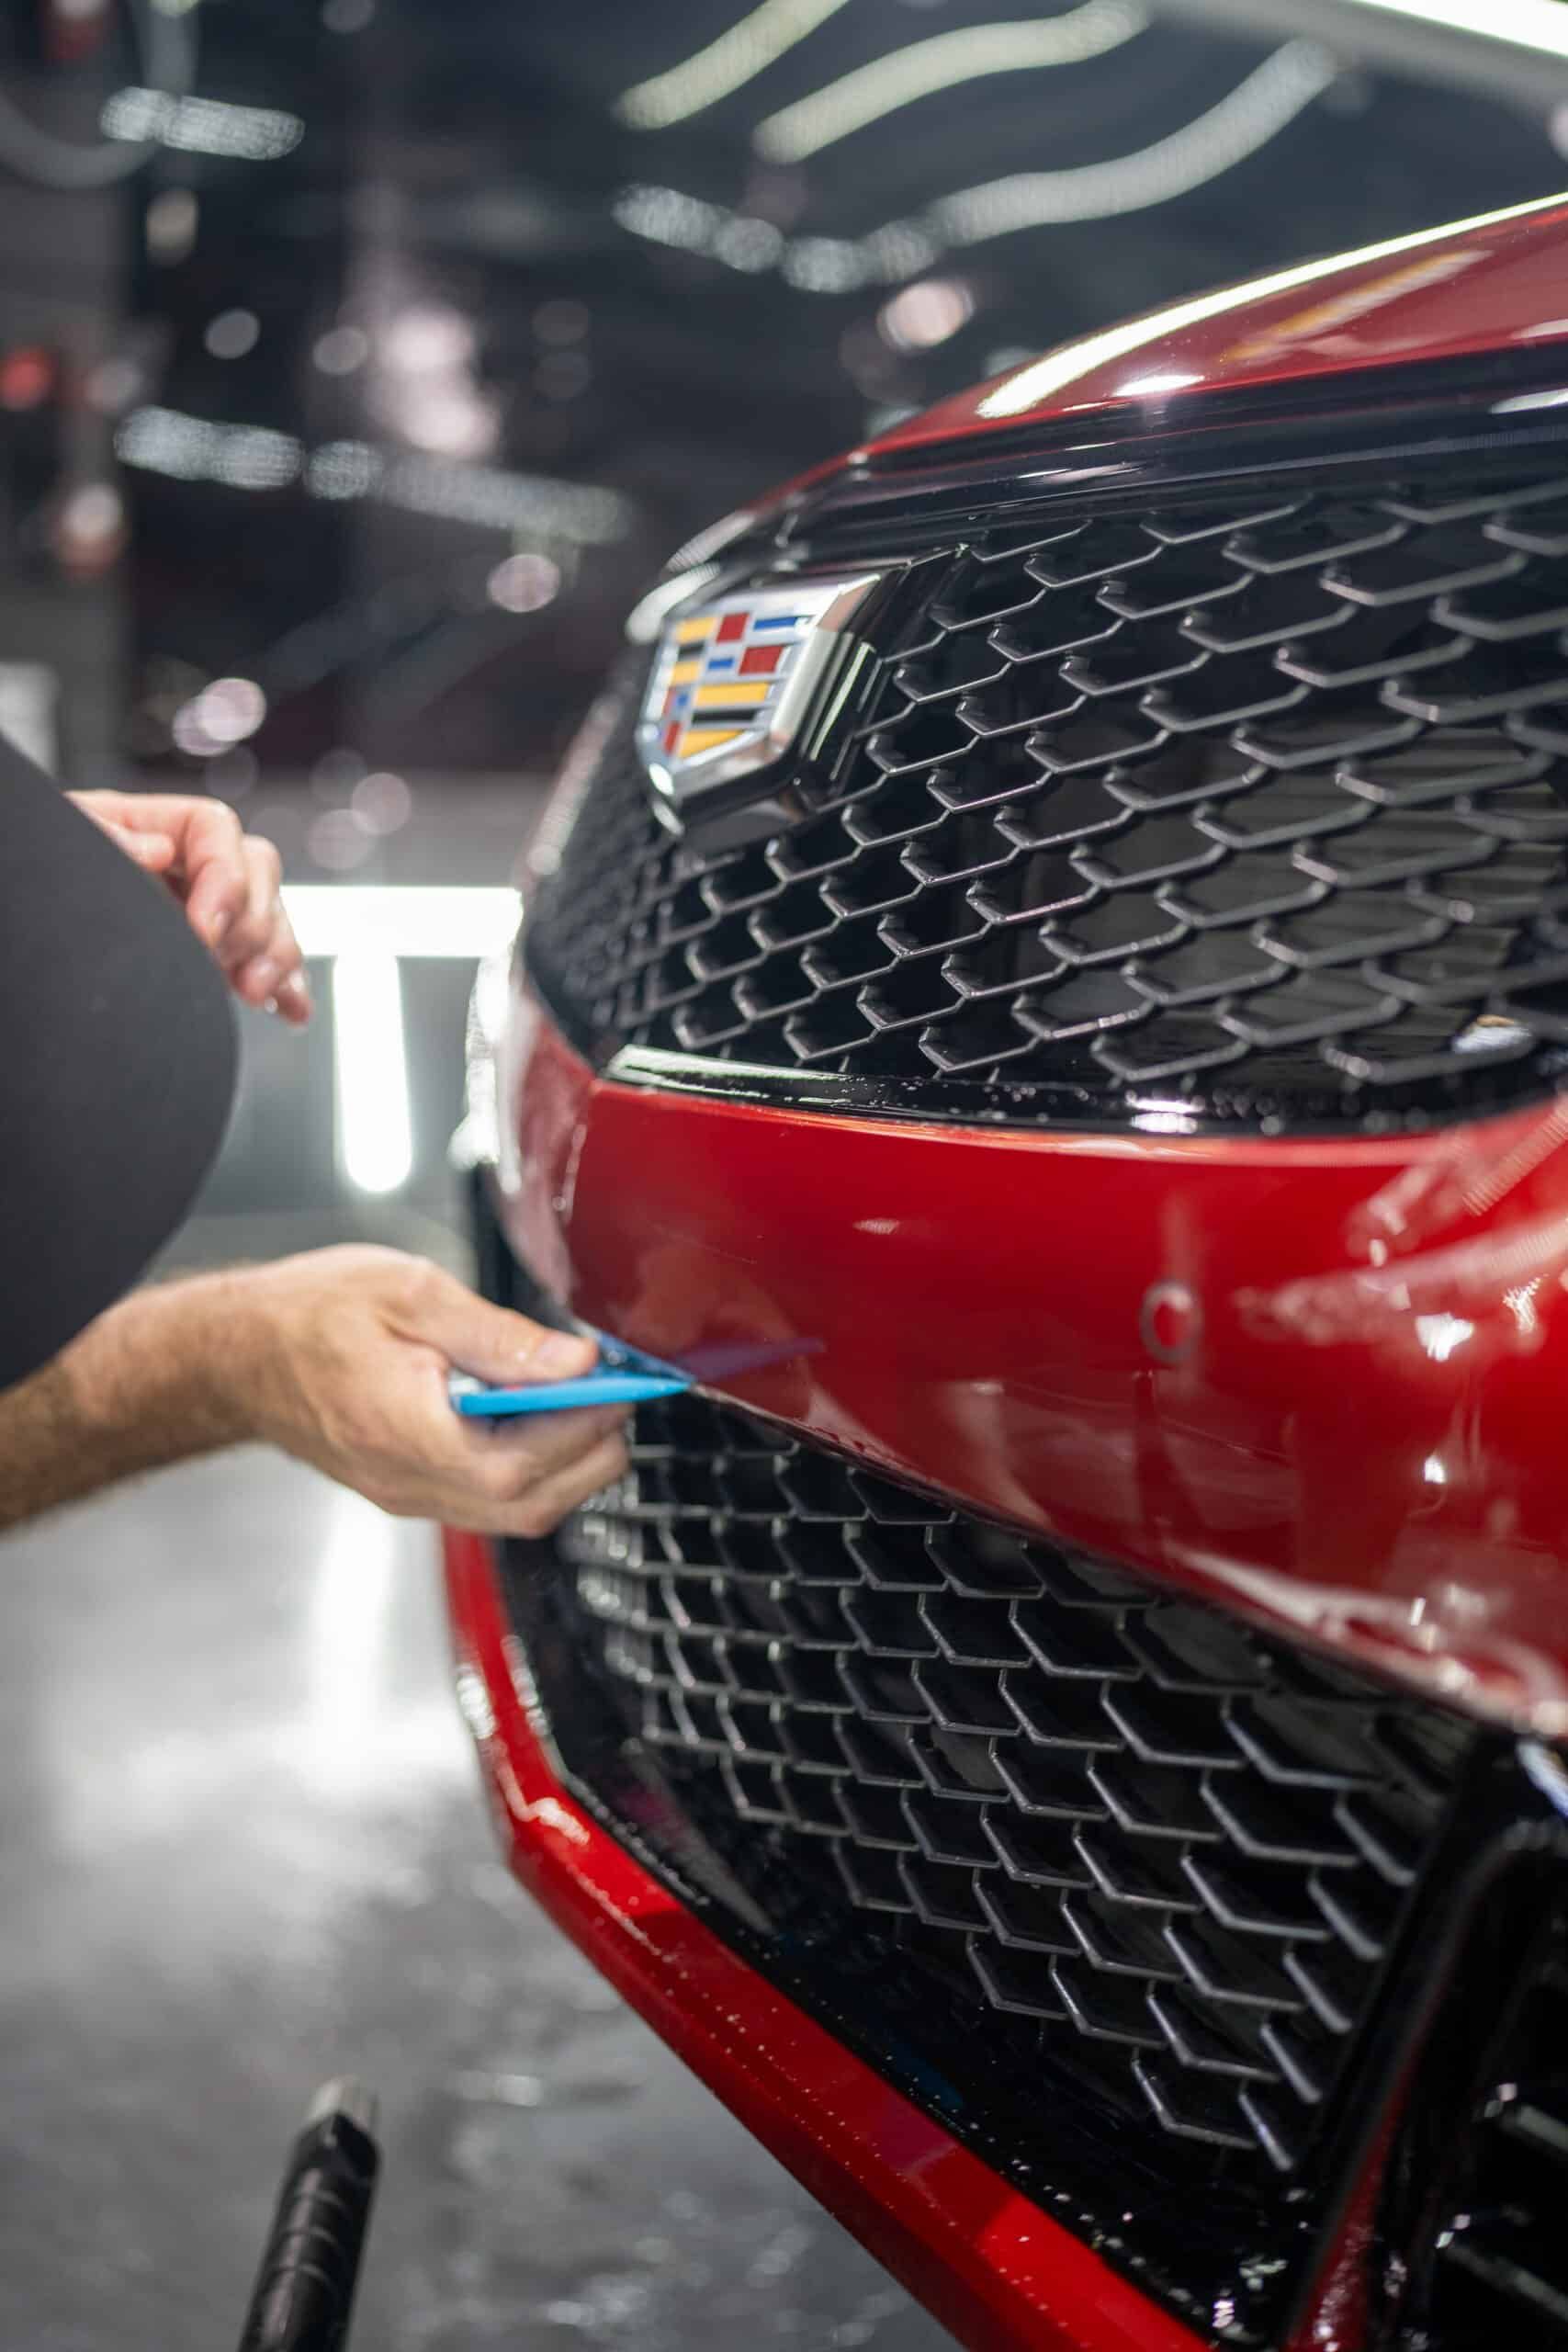 A man is applying a protective film to the front of a red cadillac.